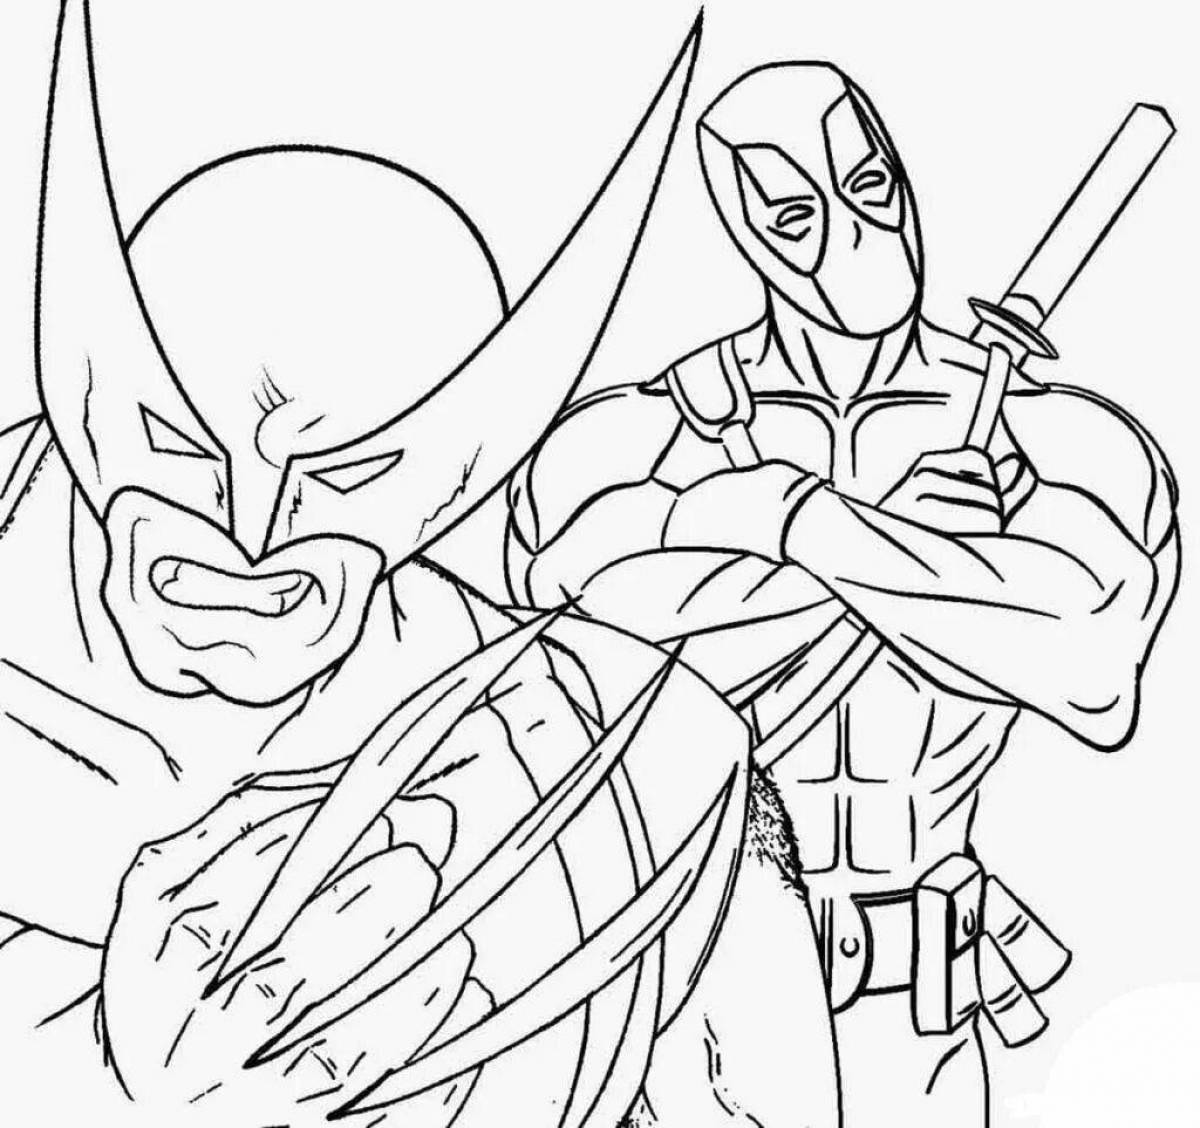 Exquisite wolverine coloring book for kids